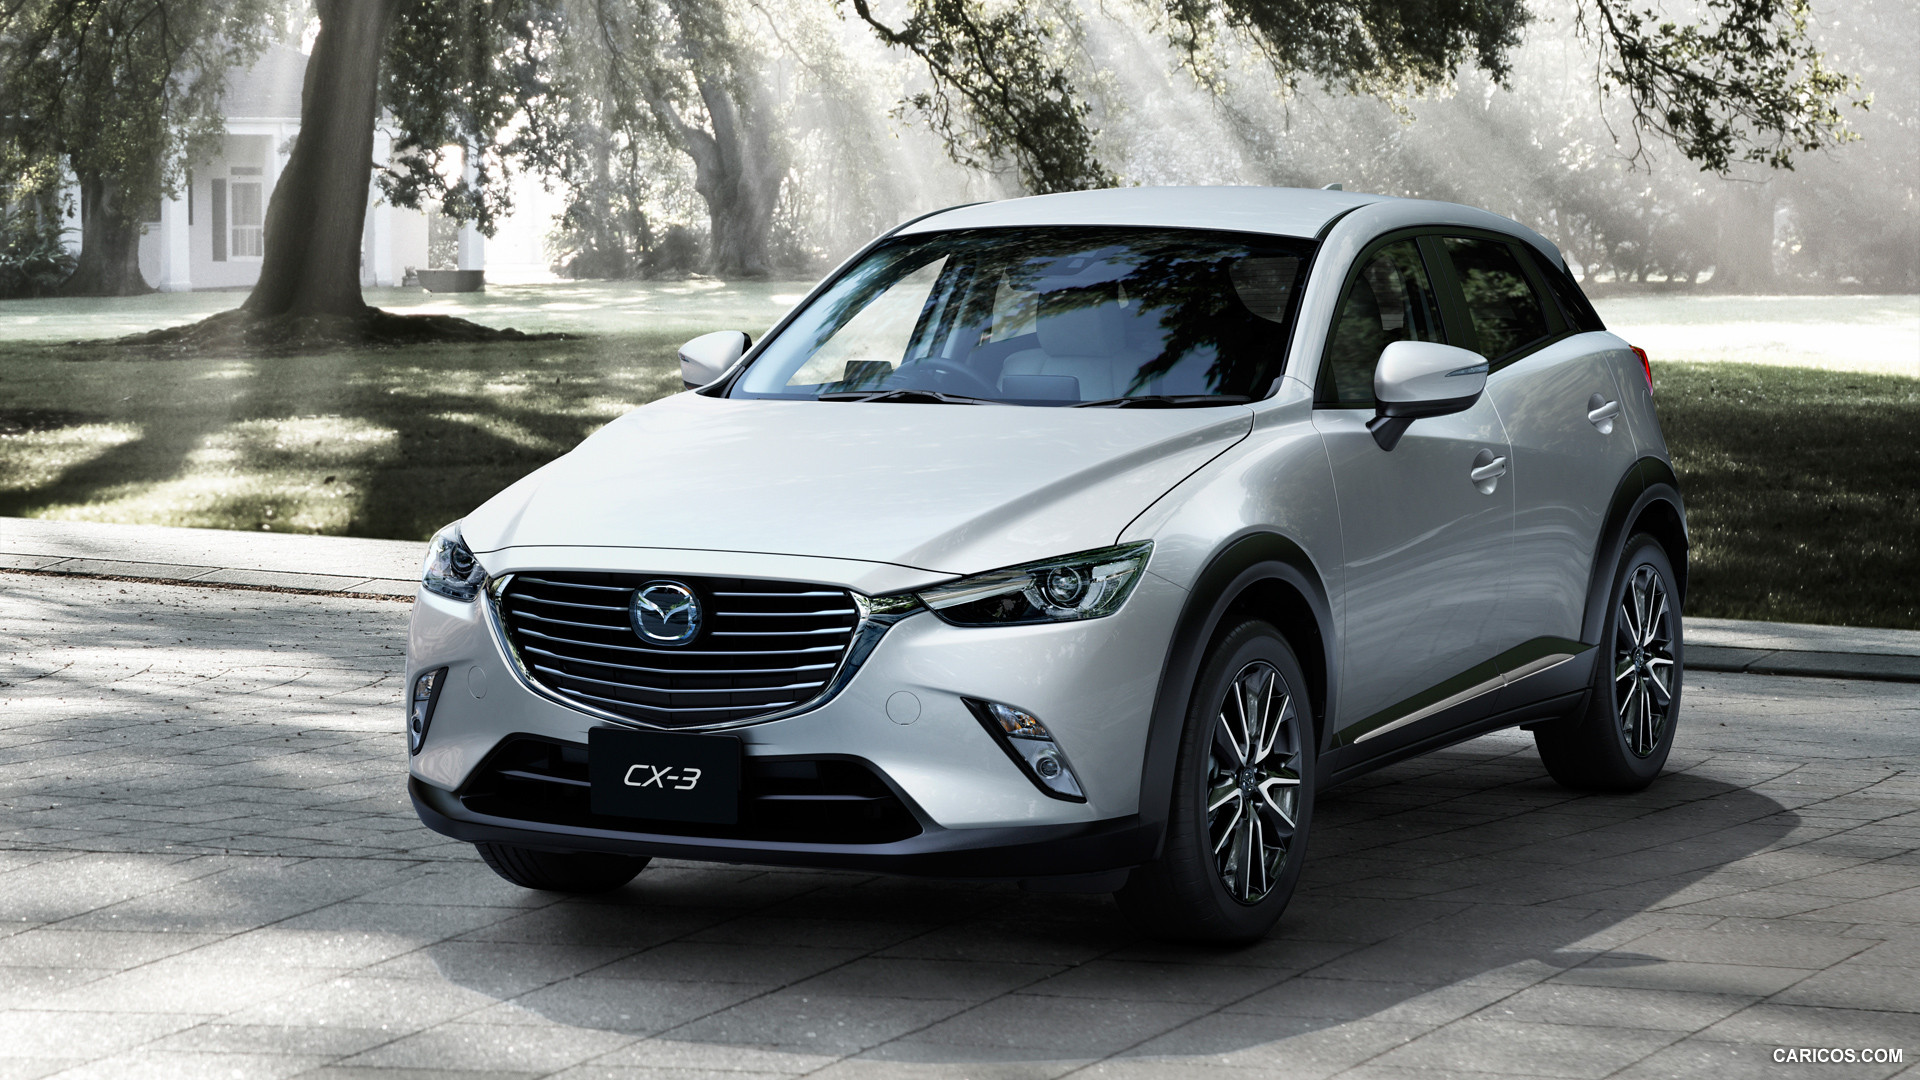 2016 Mazda CX-3  - Front, #1 of 285